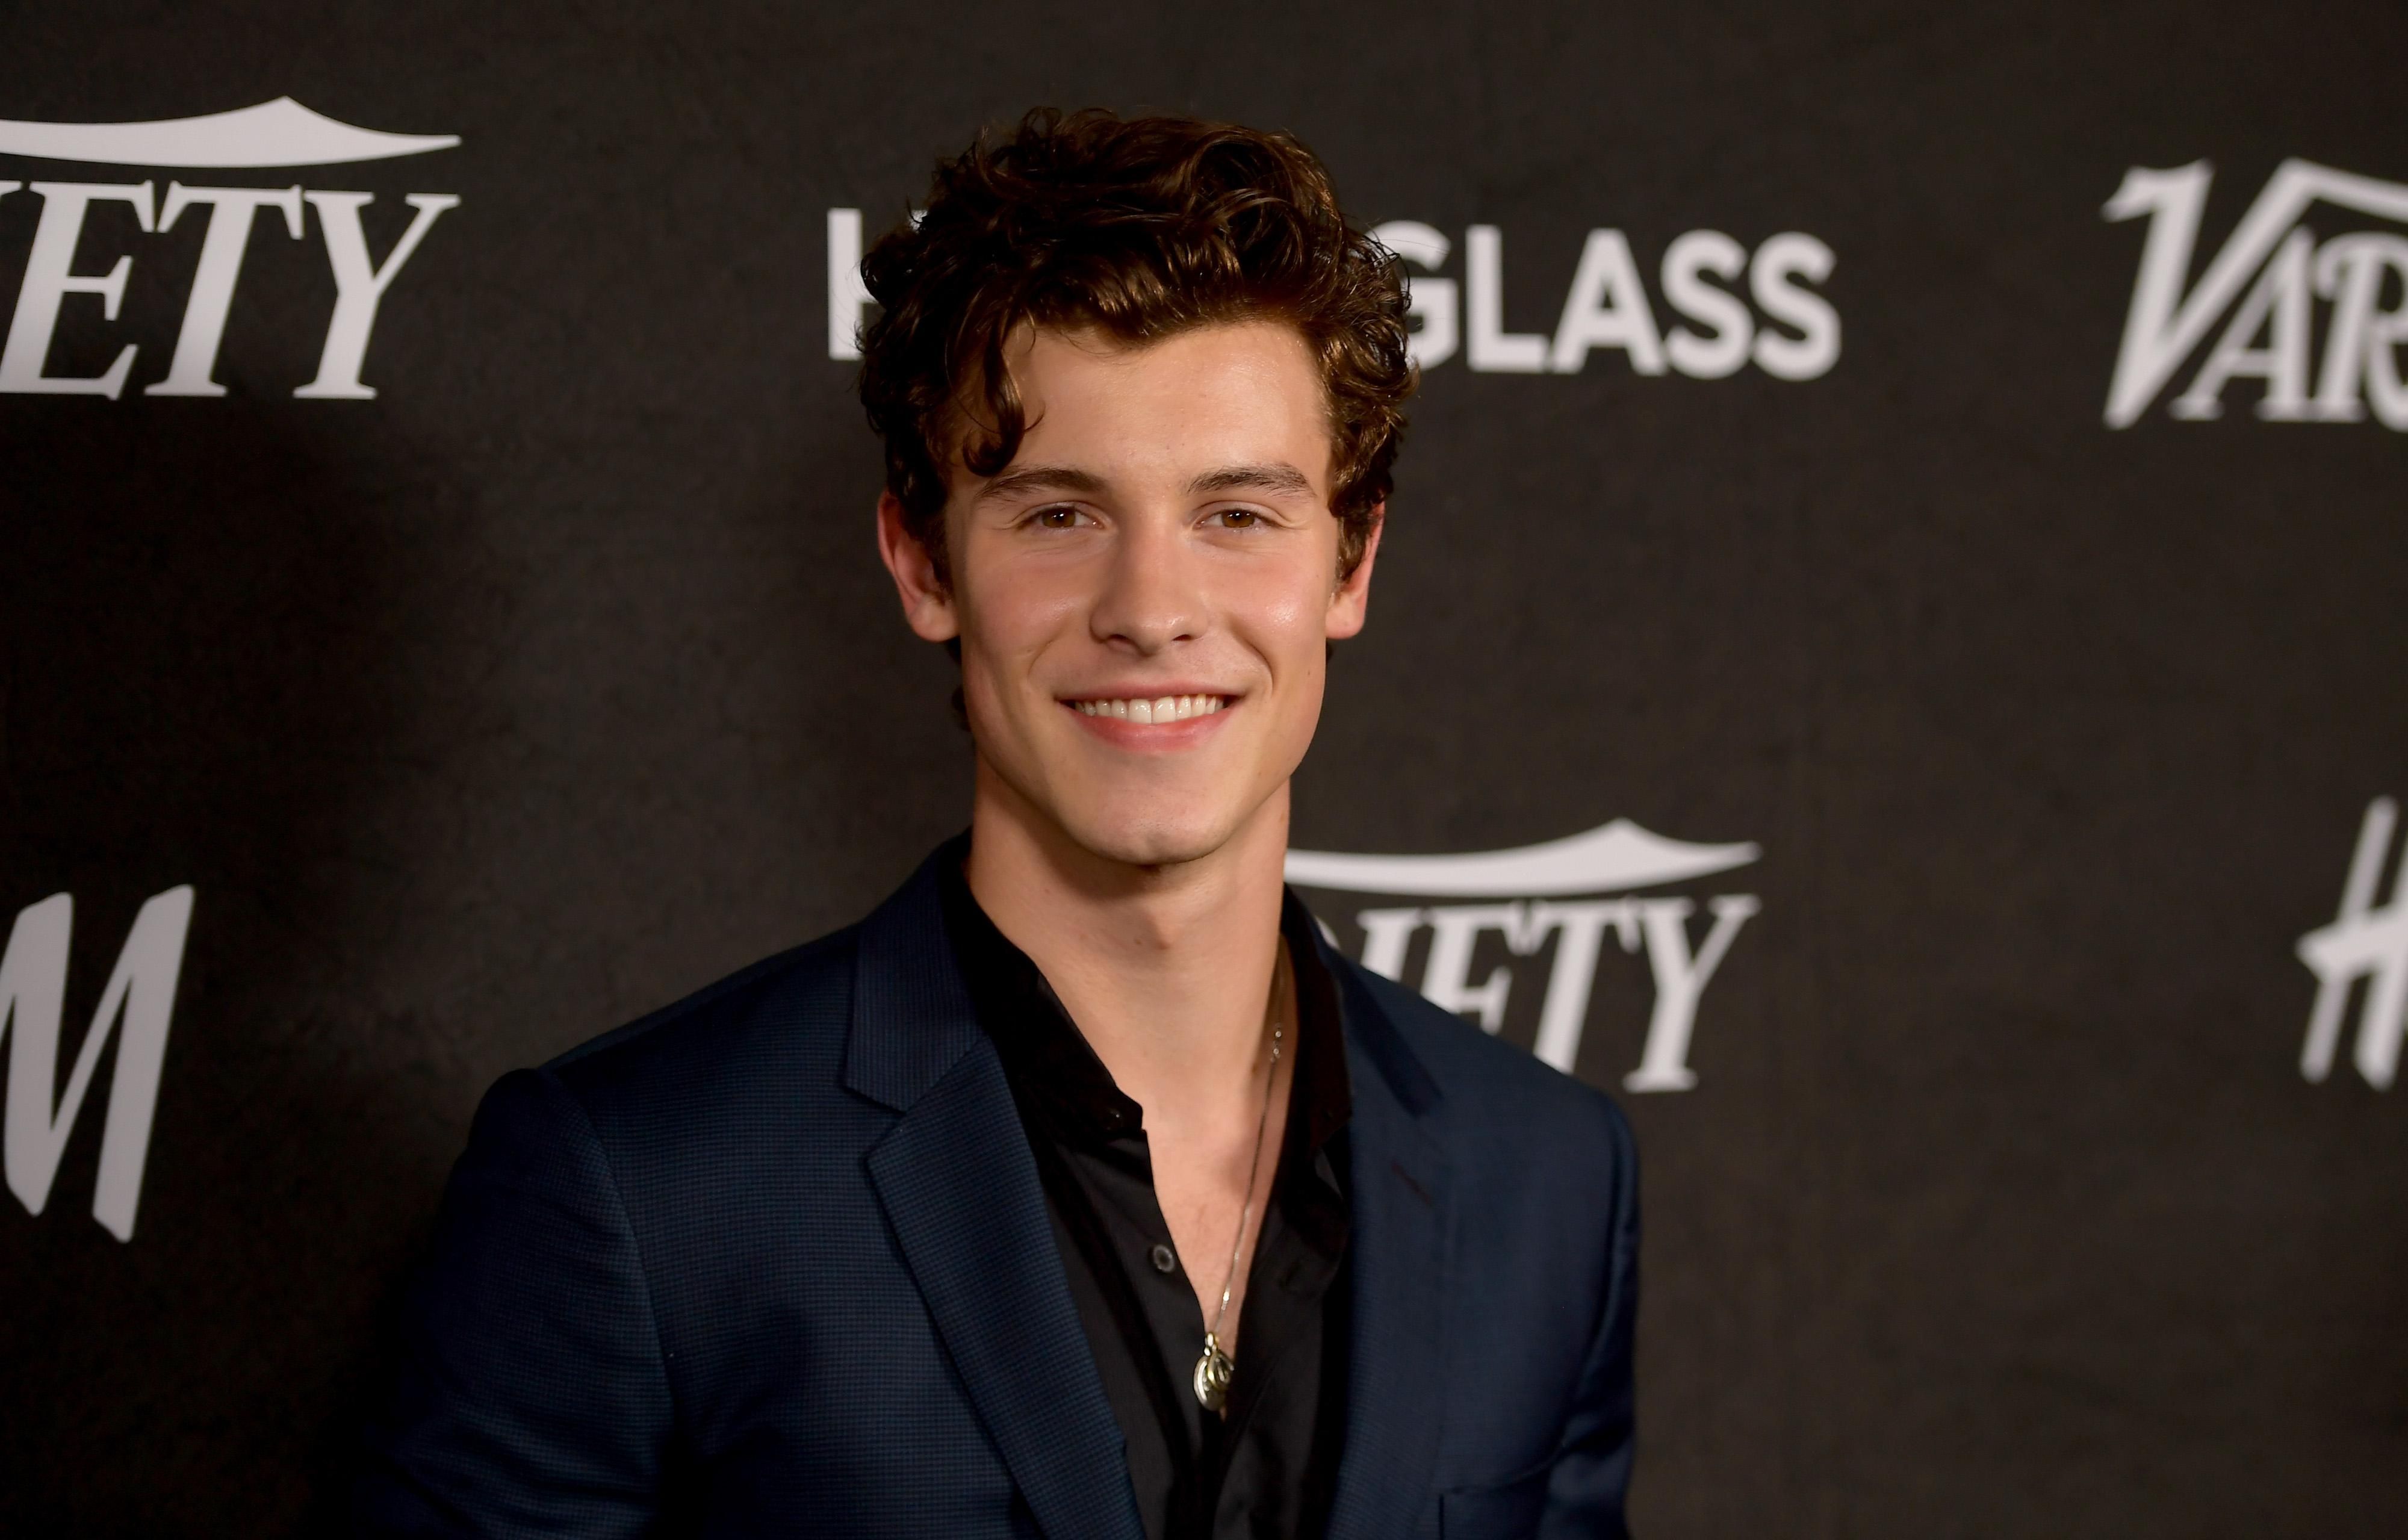 Shawn Mendes Changes His Hair to a Buzzcut Upsets Fans